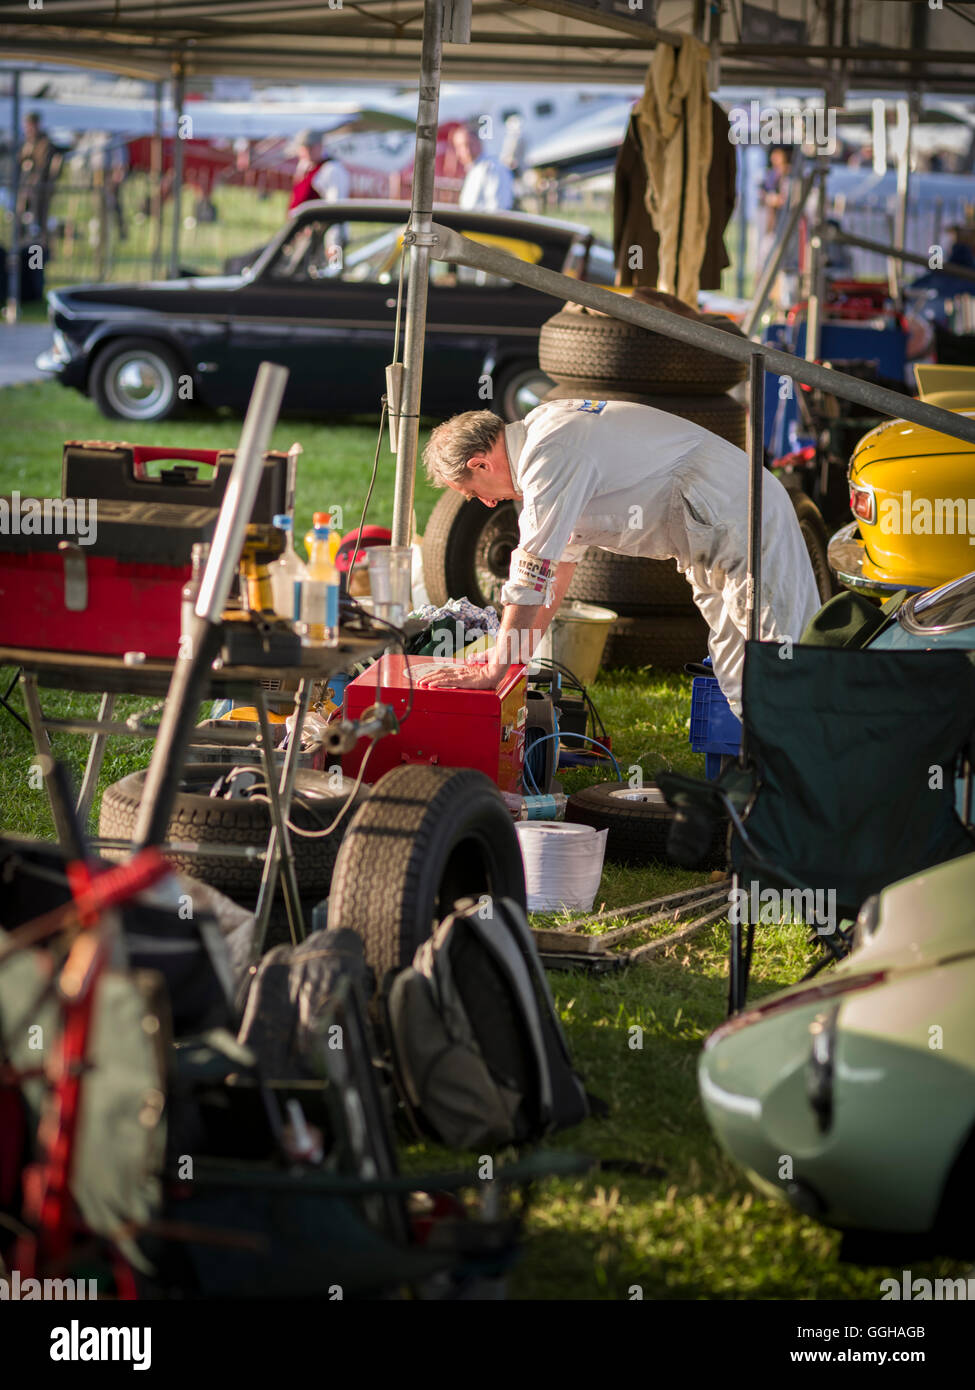 Mechanic in the paddock, Goodwood Revival 2014, Racing Sport, Classic Car, Goodwood, Chichester, Sussex, England, Great Britain Stock Photo